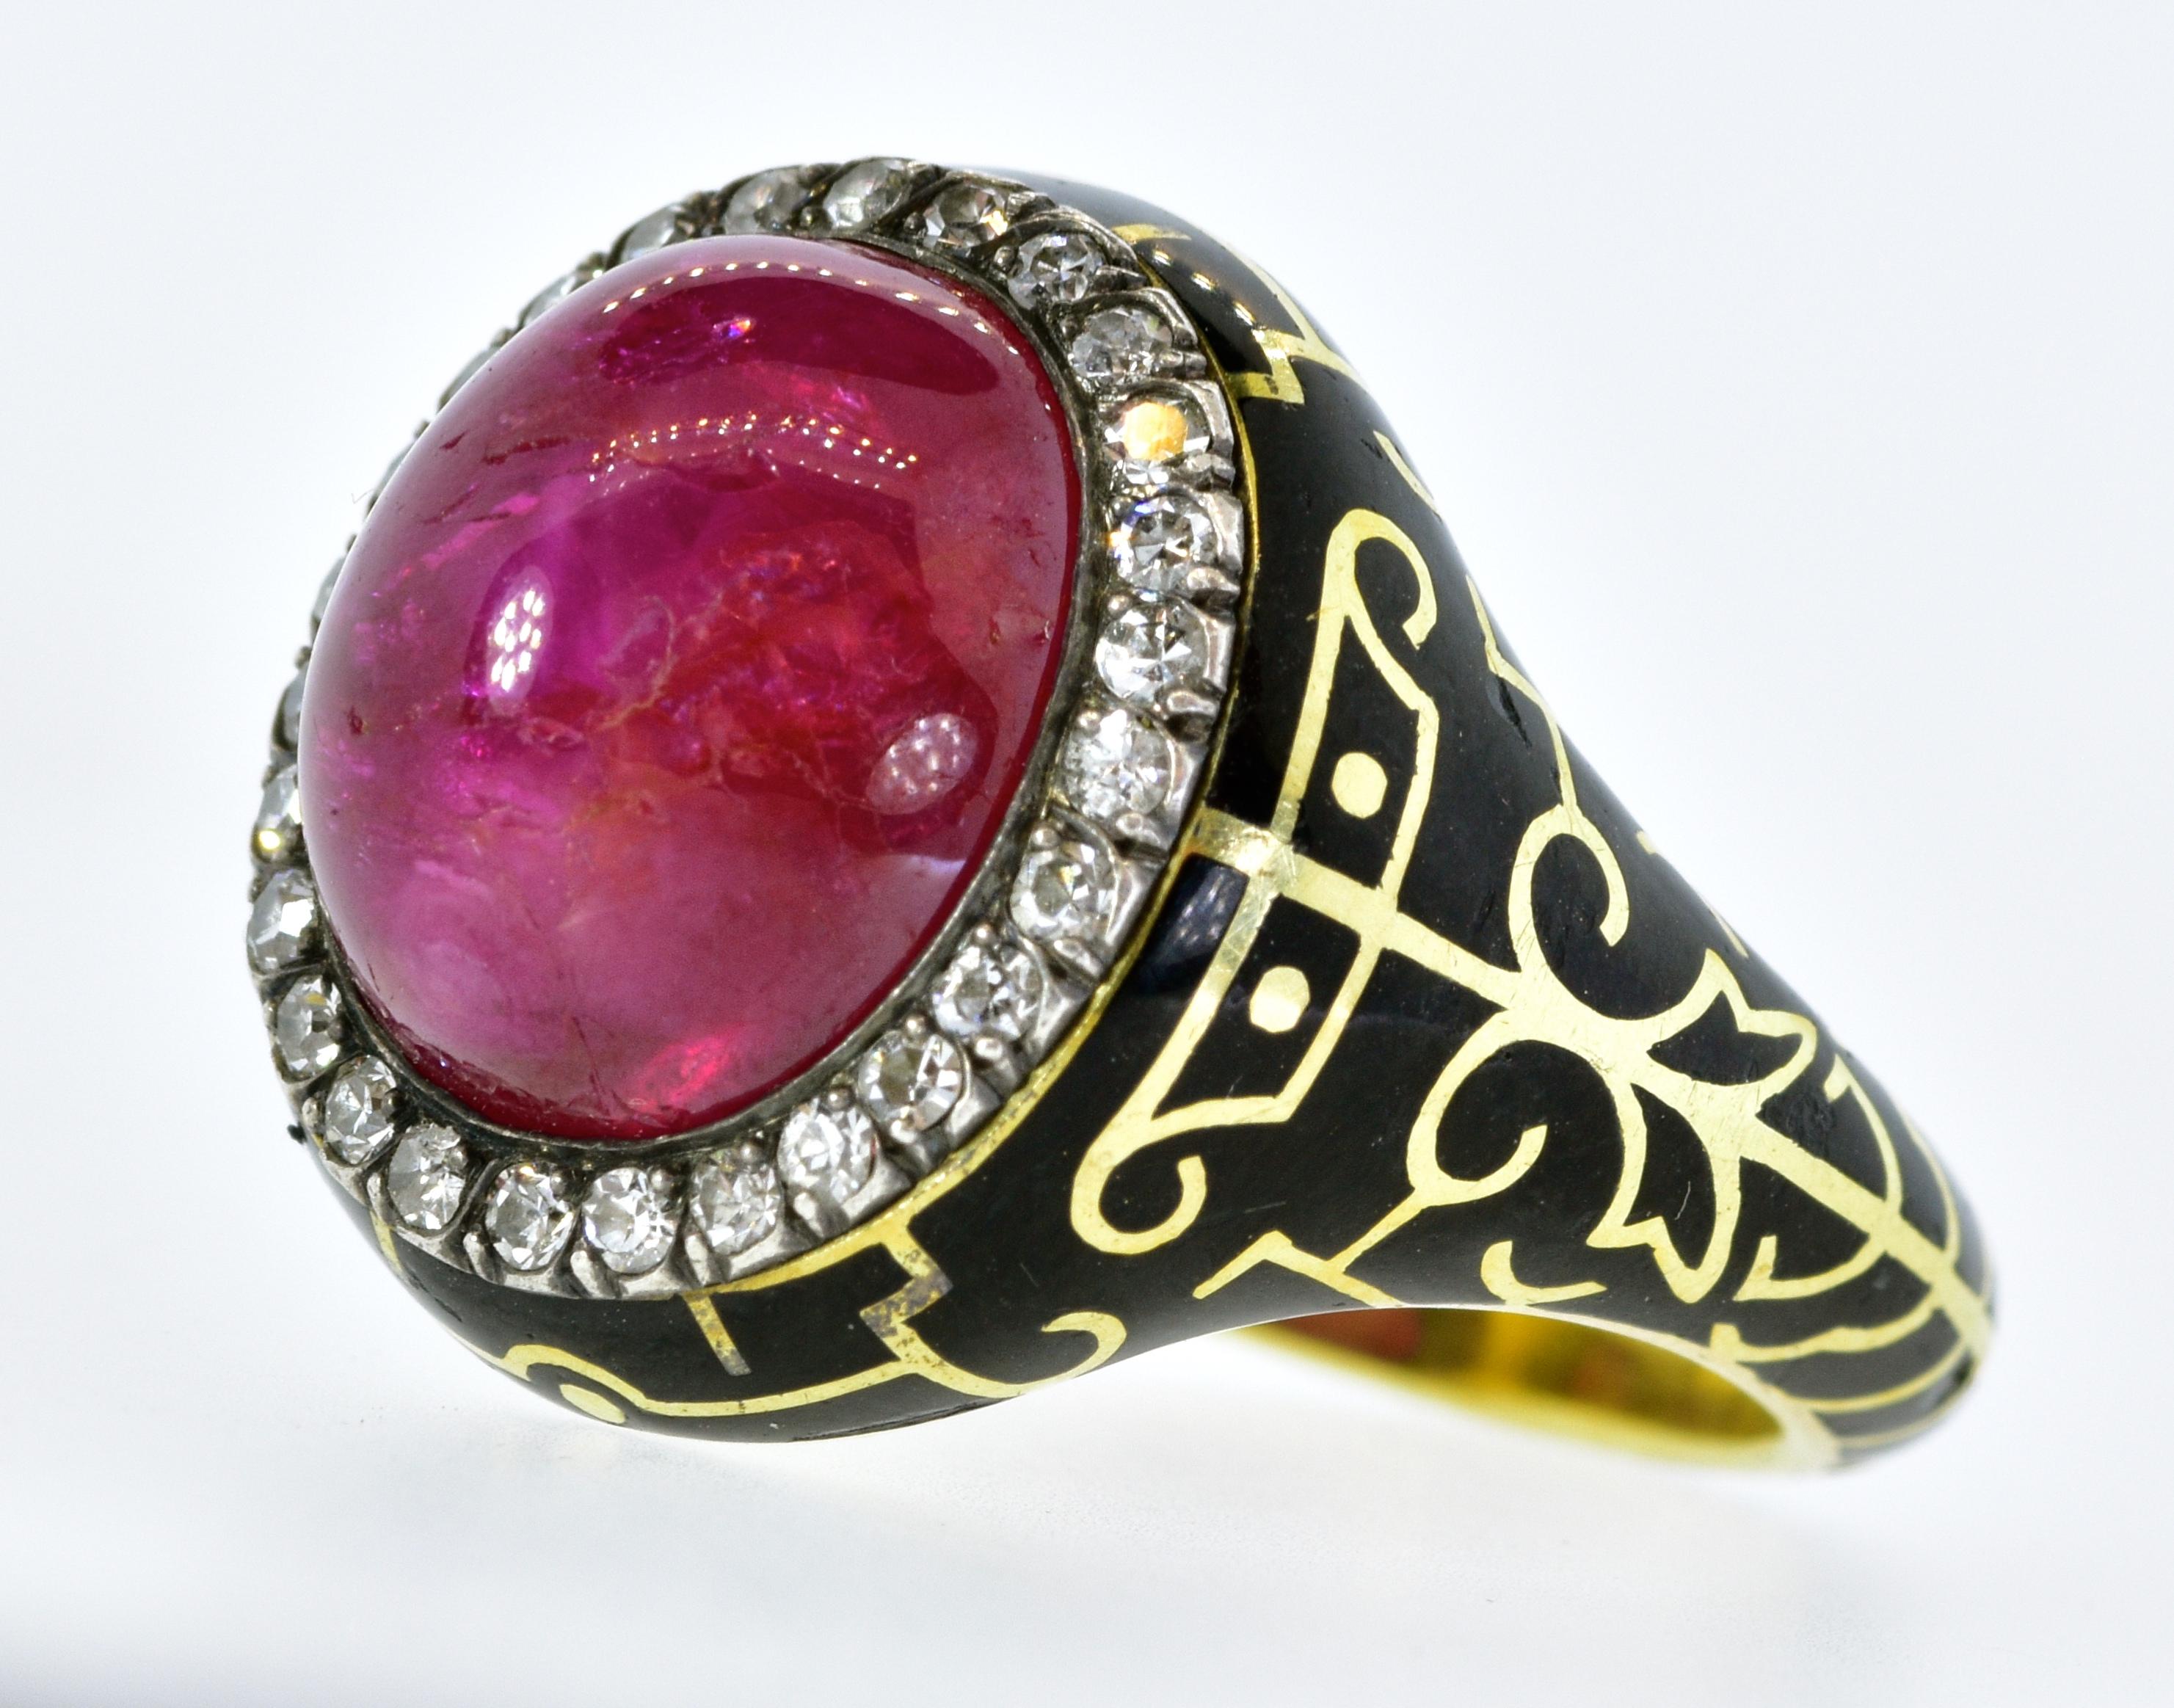 Cabochon Ruby and Diamond Antique Ring, AGL Certified Natural and Unheated, circa 1895